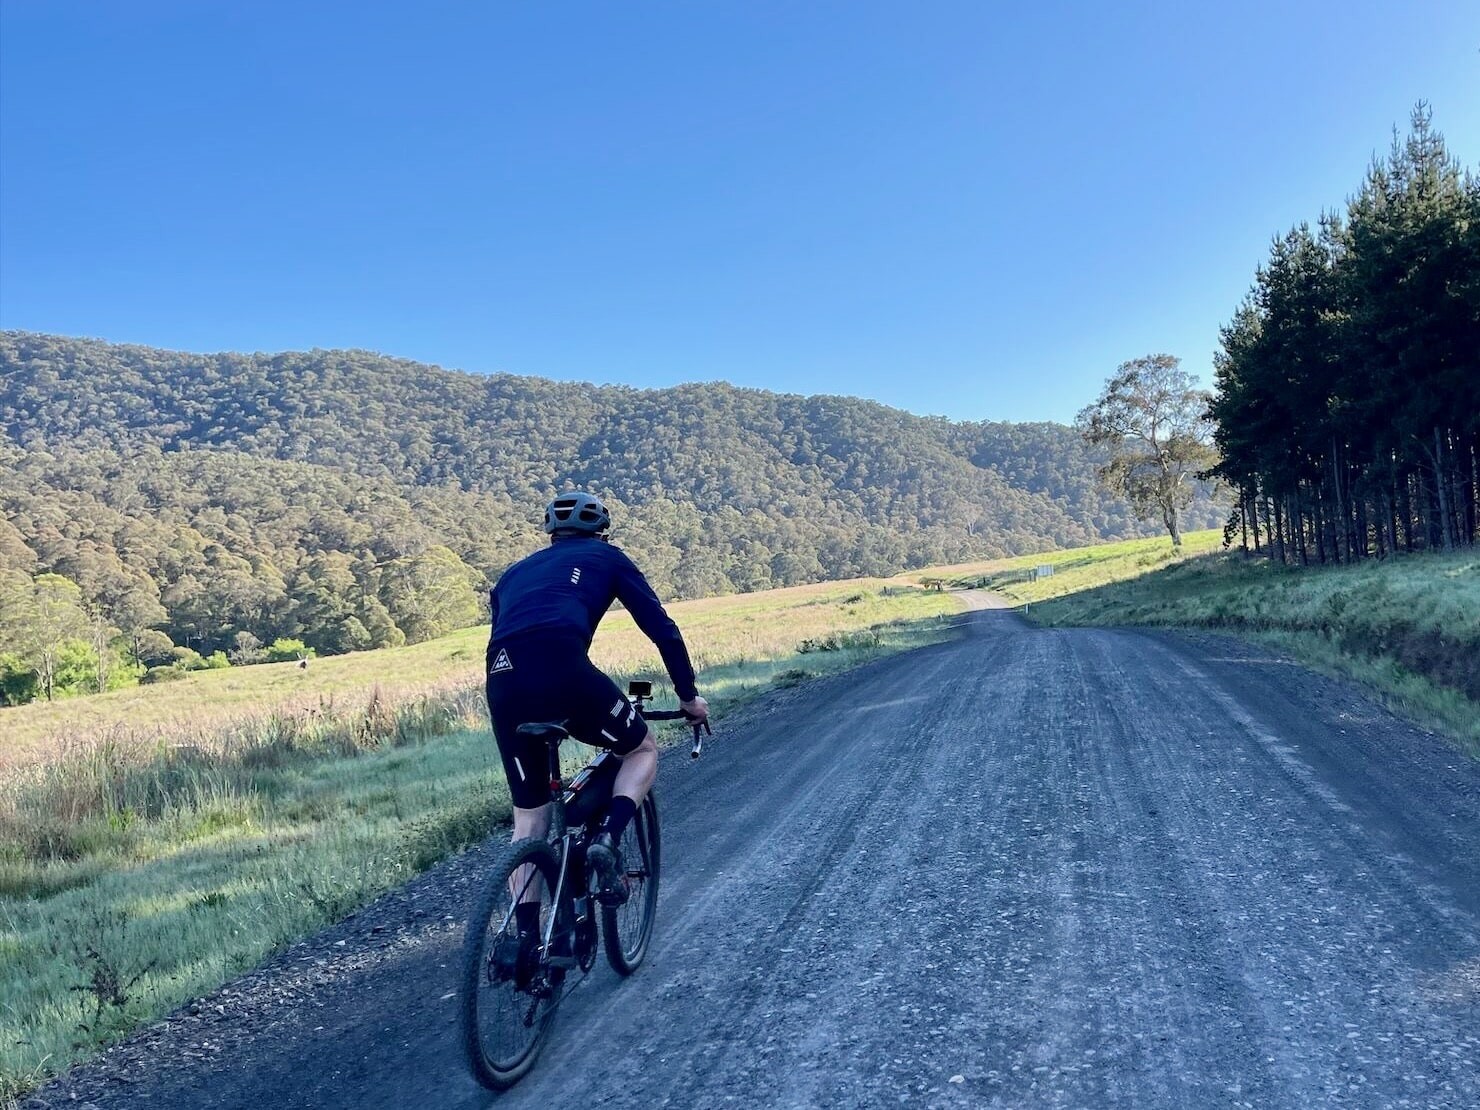 Riding through the pine forest with open farmland and native bush covered hills in the background